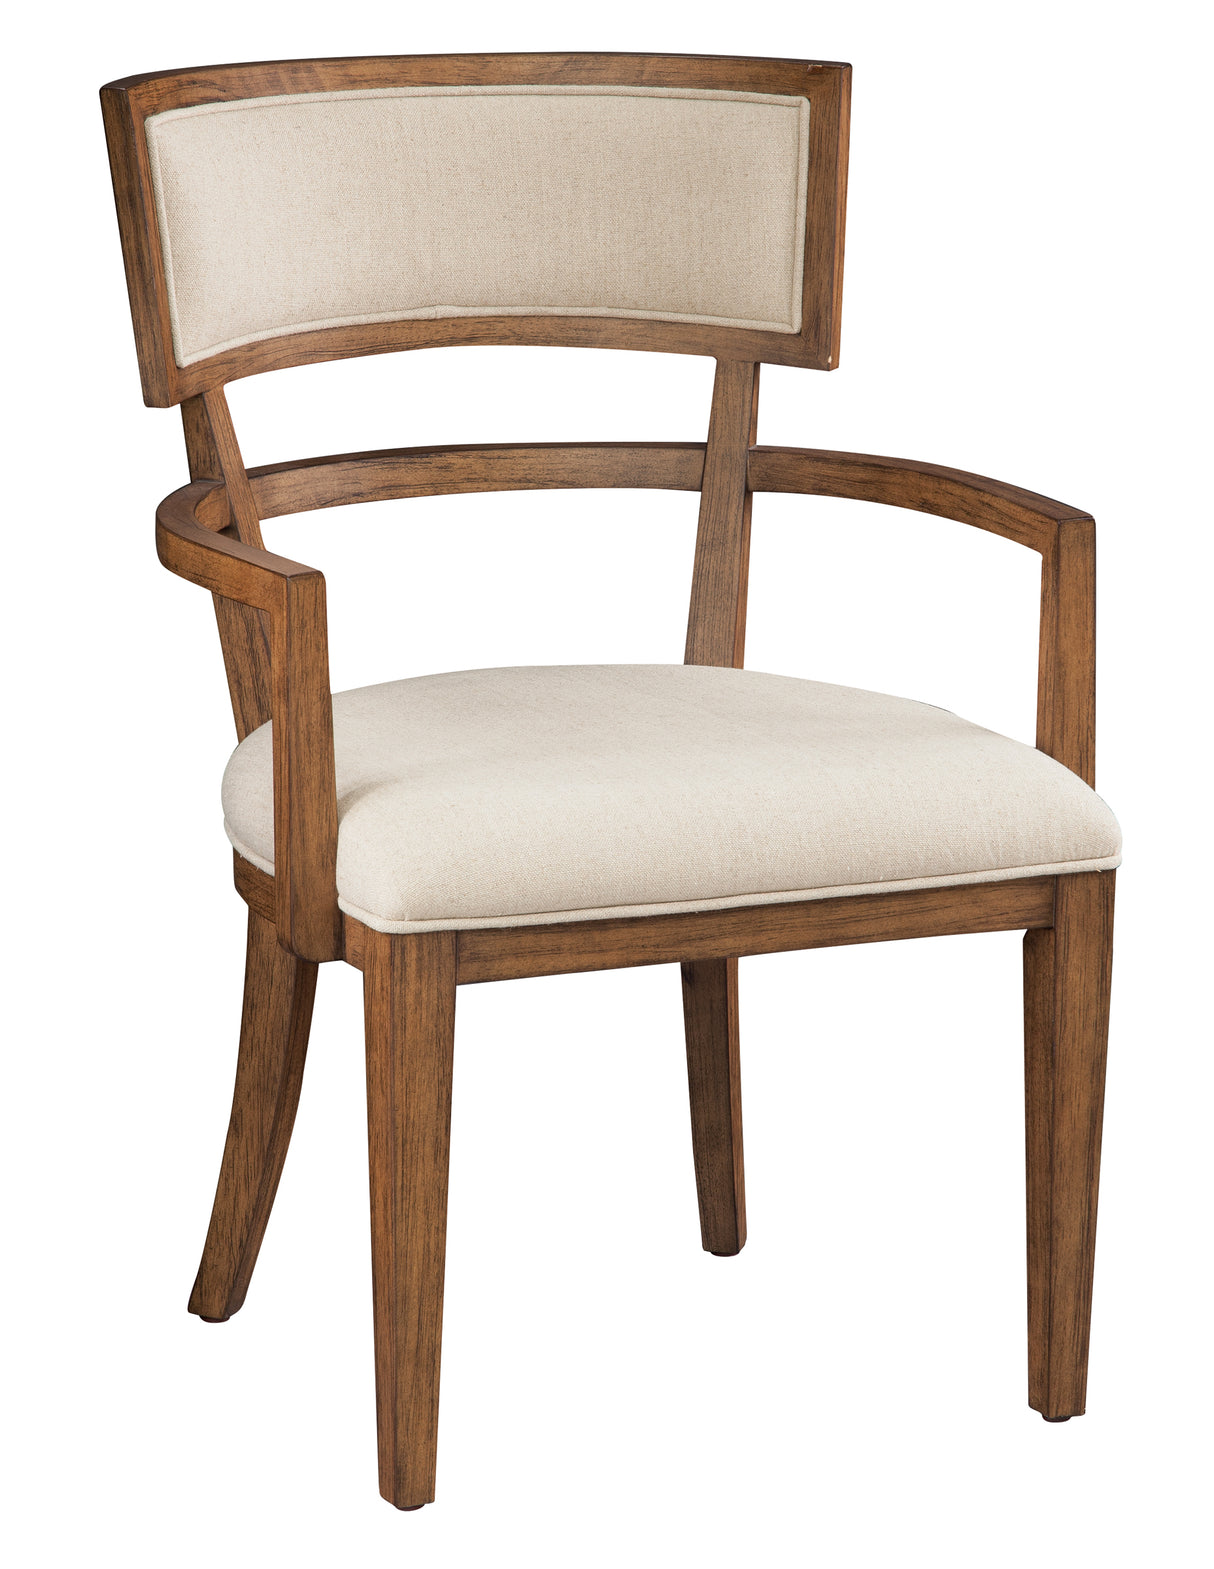 Hekman 23722 Bedford Park 24.5in. x 24.5in. x 36in. Dining Arm Chair